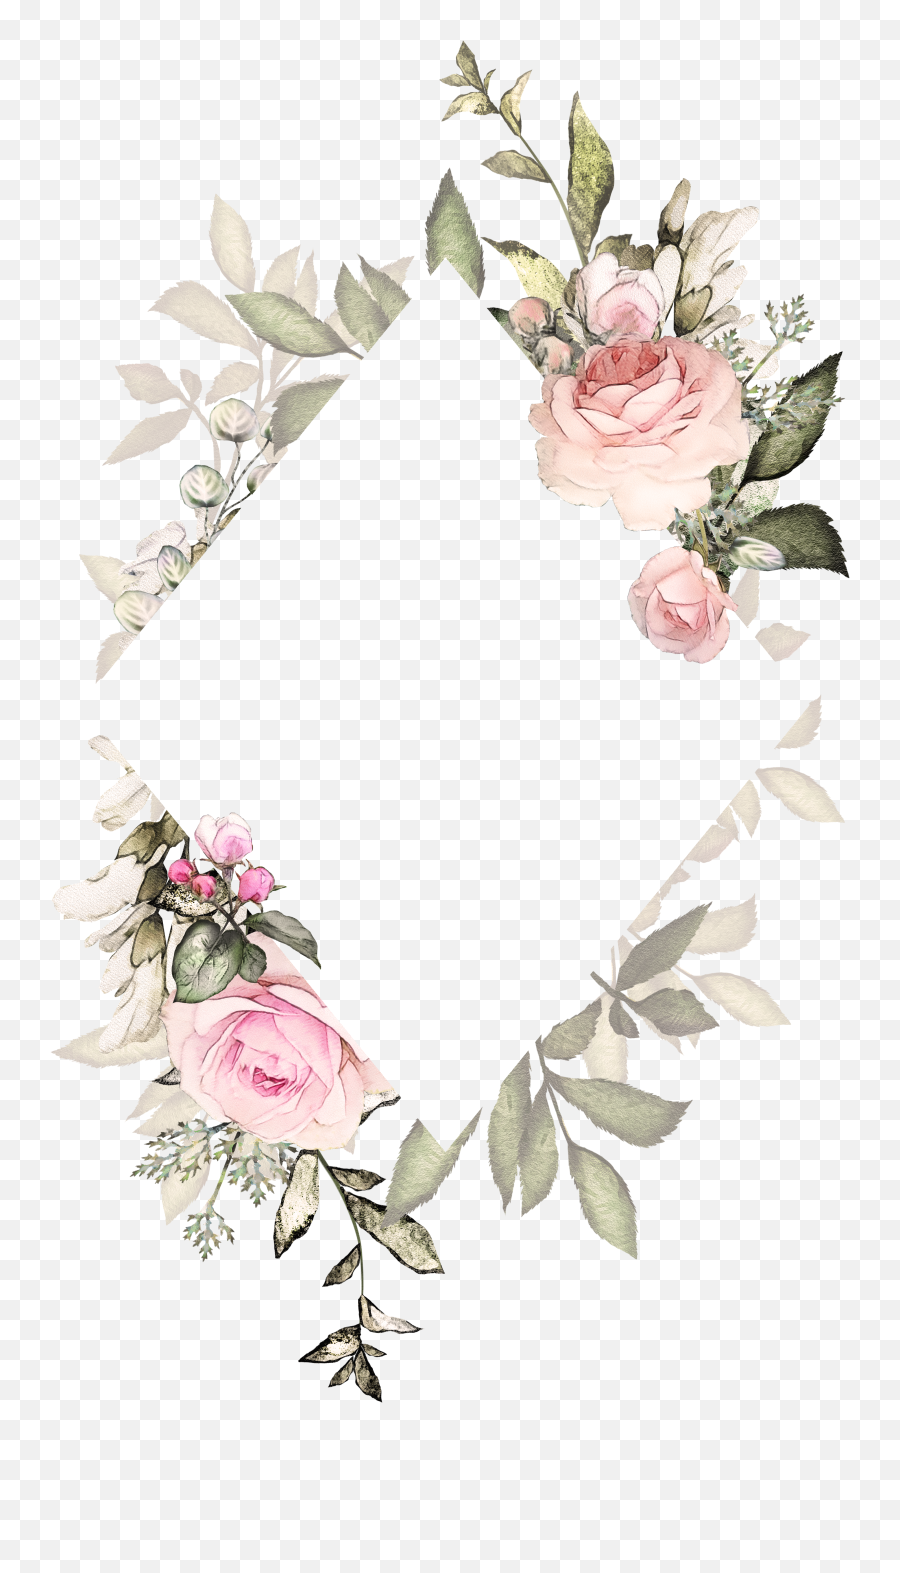 650 Wallpaper Ideas - Transparent Background Floral Wedding Png,Lyndsy Fonseca Icon